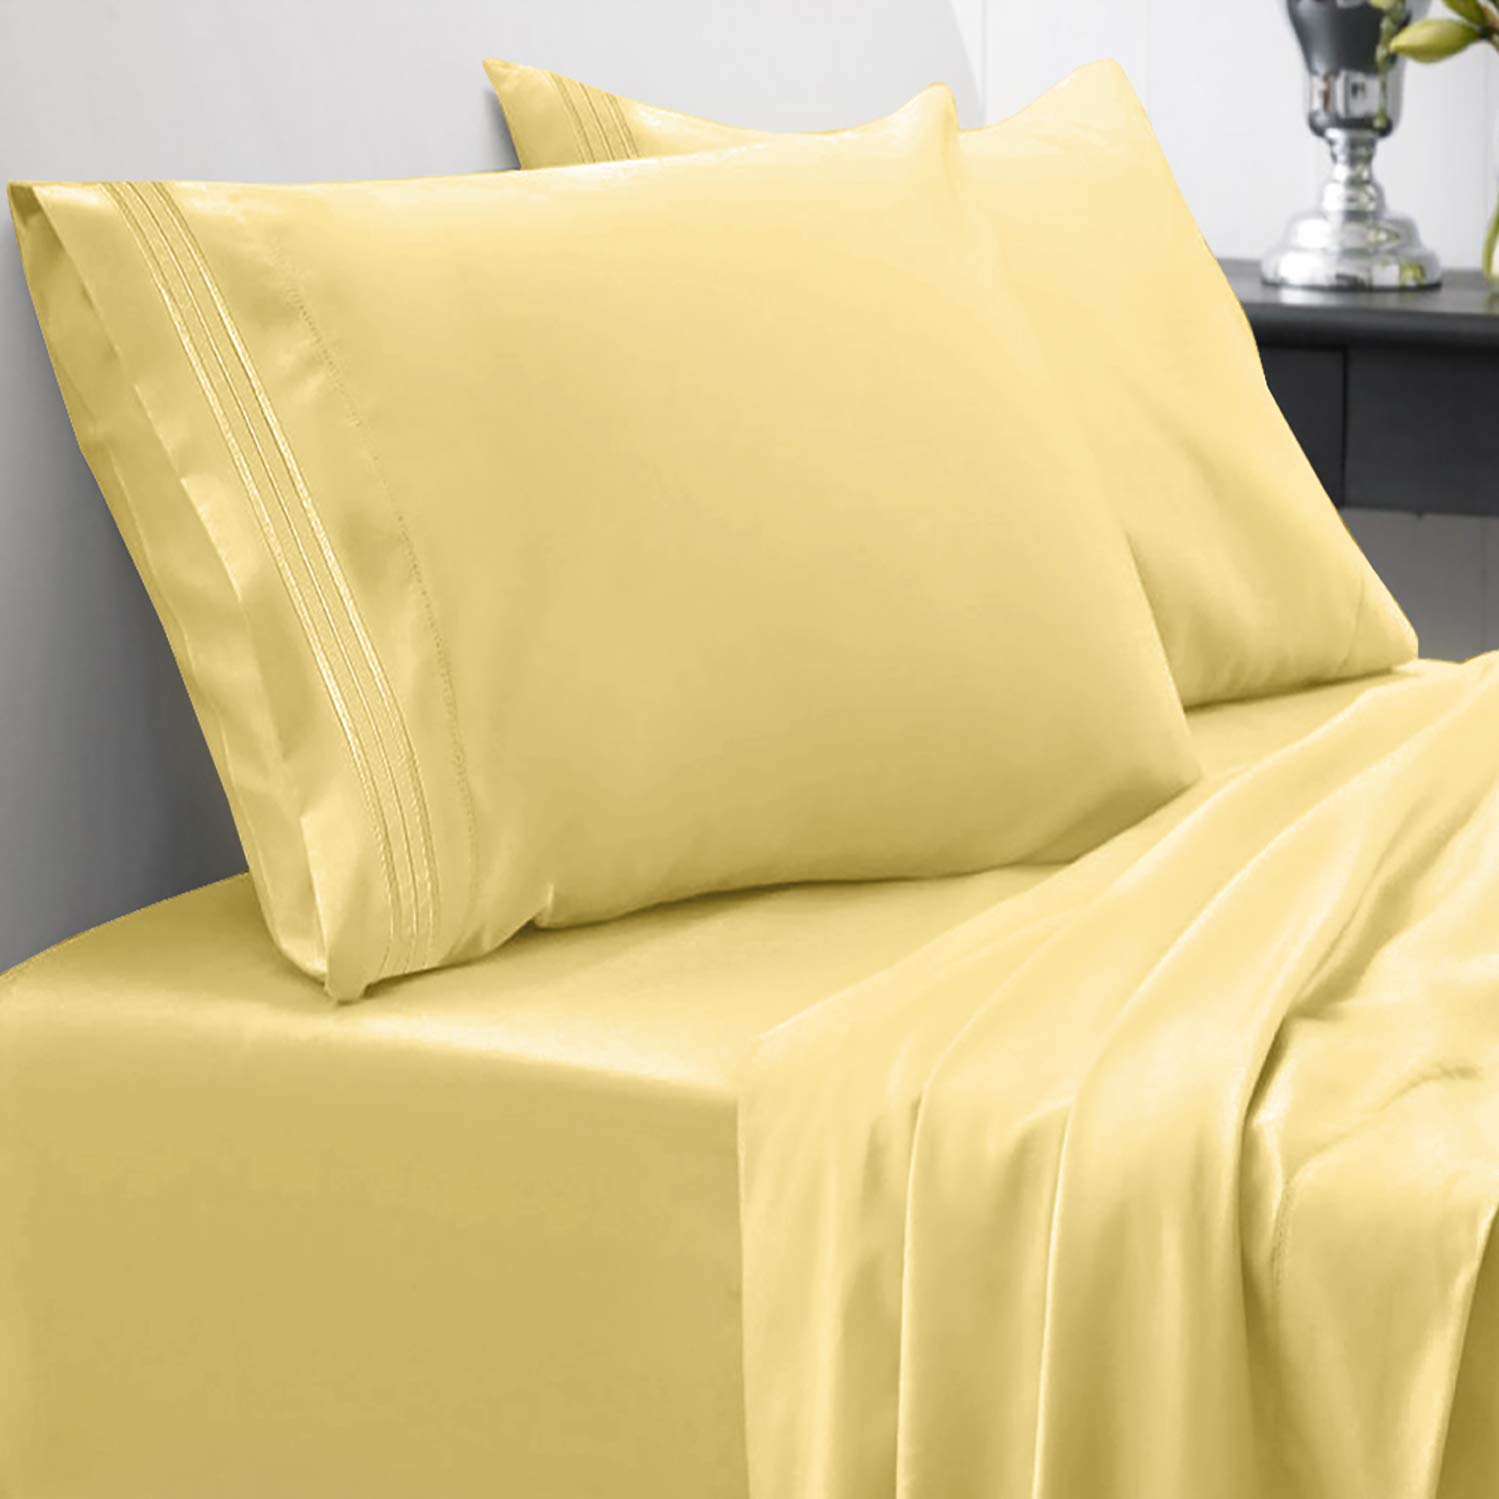 Book Cover King Size Sheets - Breathable Luxury Bed Sheets with Full Elastic & Secure Corner Straps Built In - 1800 Supreme Collection Extra Soft Deep Pocket Bedding Set, Sheet Set, King, Yellow Yellow King Sheet Set